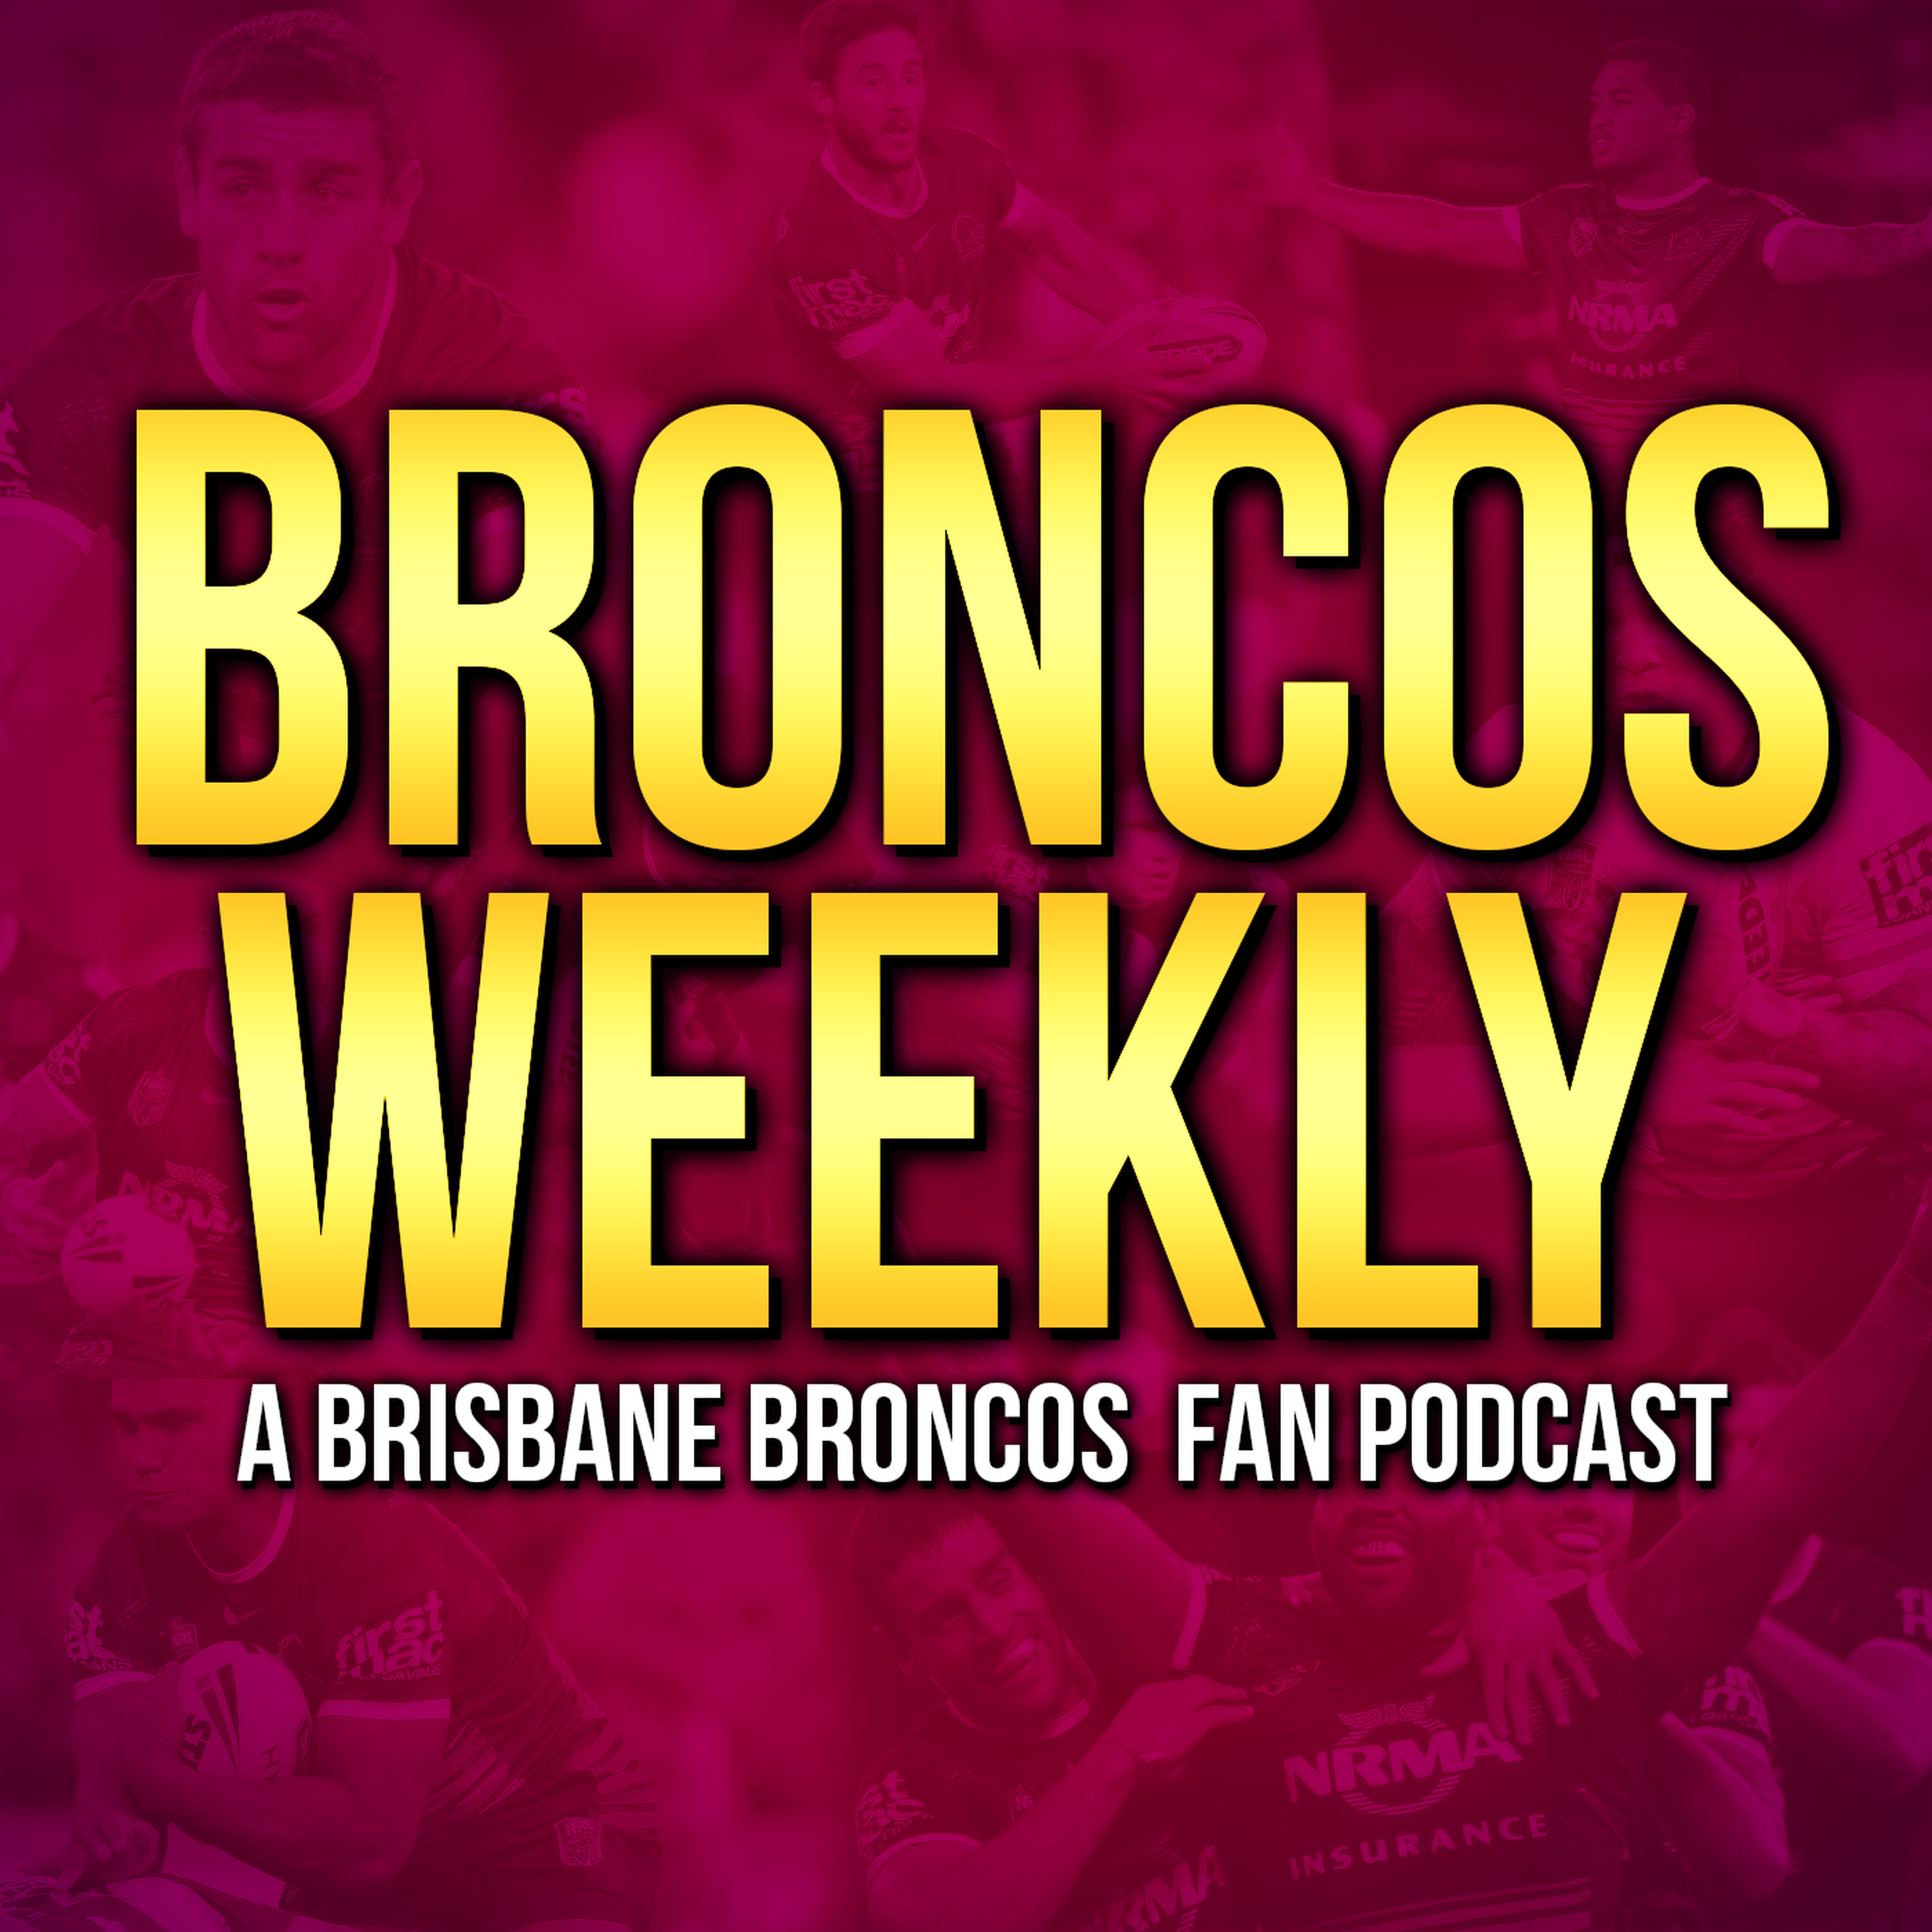 Broncos Fortnightly - The Croft Chronicles pt. 47